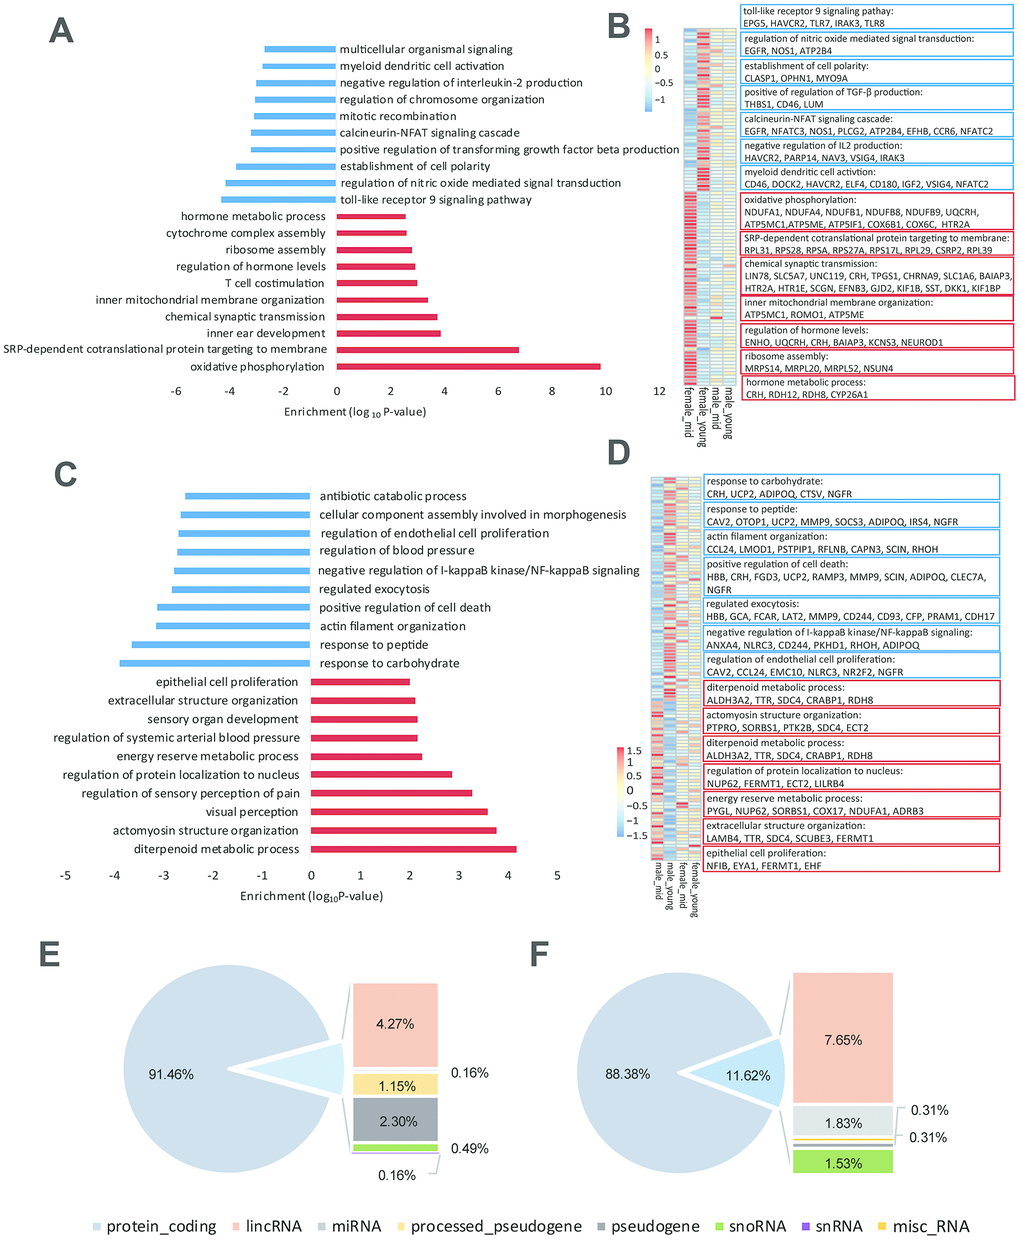 Age-related differentially expressed genes in the hypothalamus of rhesus macaque. (A–C) GO functional enrichment of age-related differentially expressed genes in the hypothalami of females (A) and males (C) (red: upregulated genes in middle age; blue: downregulated genes in middle age; each shows top 10 items). (B–D) Heatmaps of genes enriched in the items of (A, C). (E, F) Gene types of age-related differentially expressed genes in the hypothalami of females (E) and males (F).